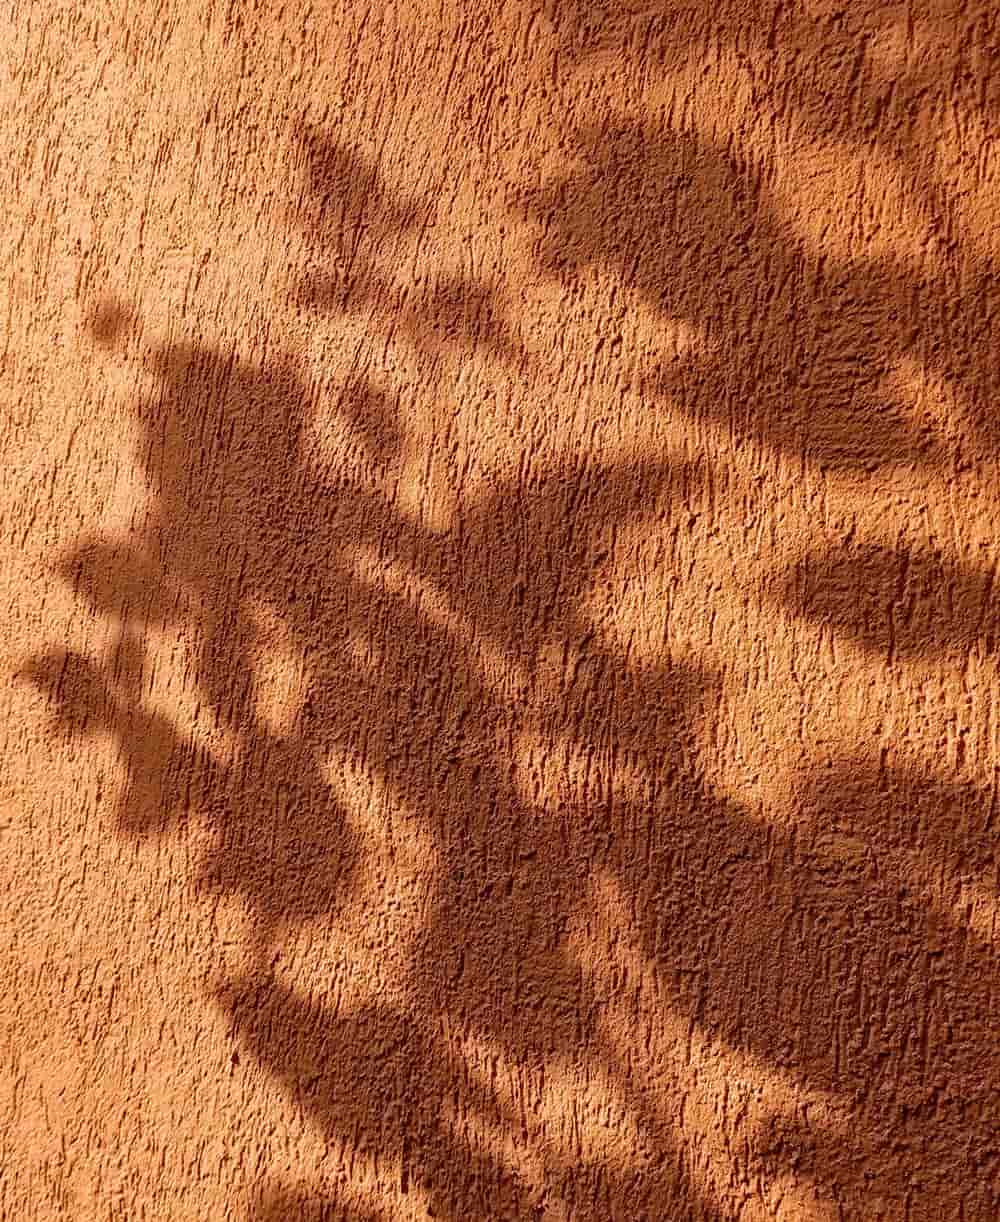 An orange wall with leaves shadows on it